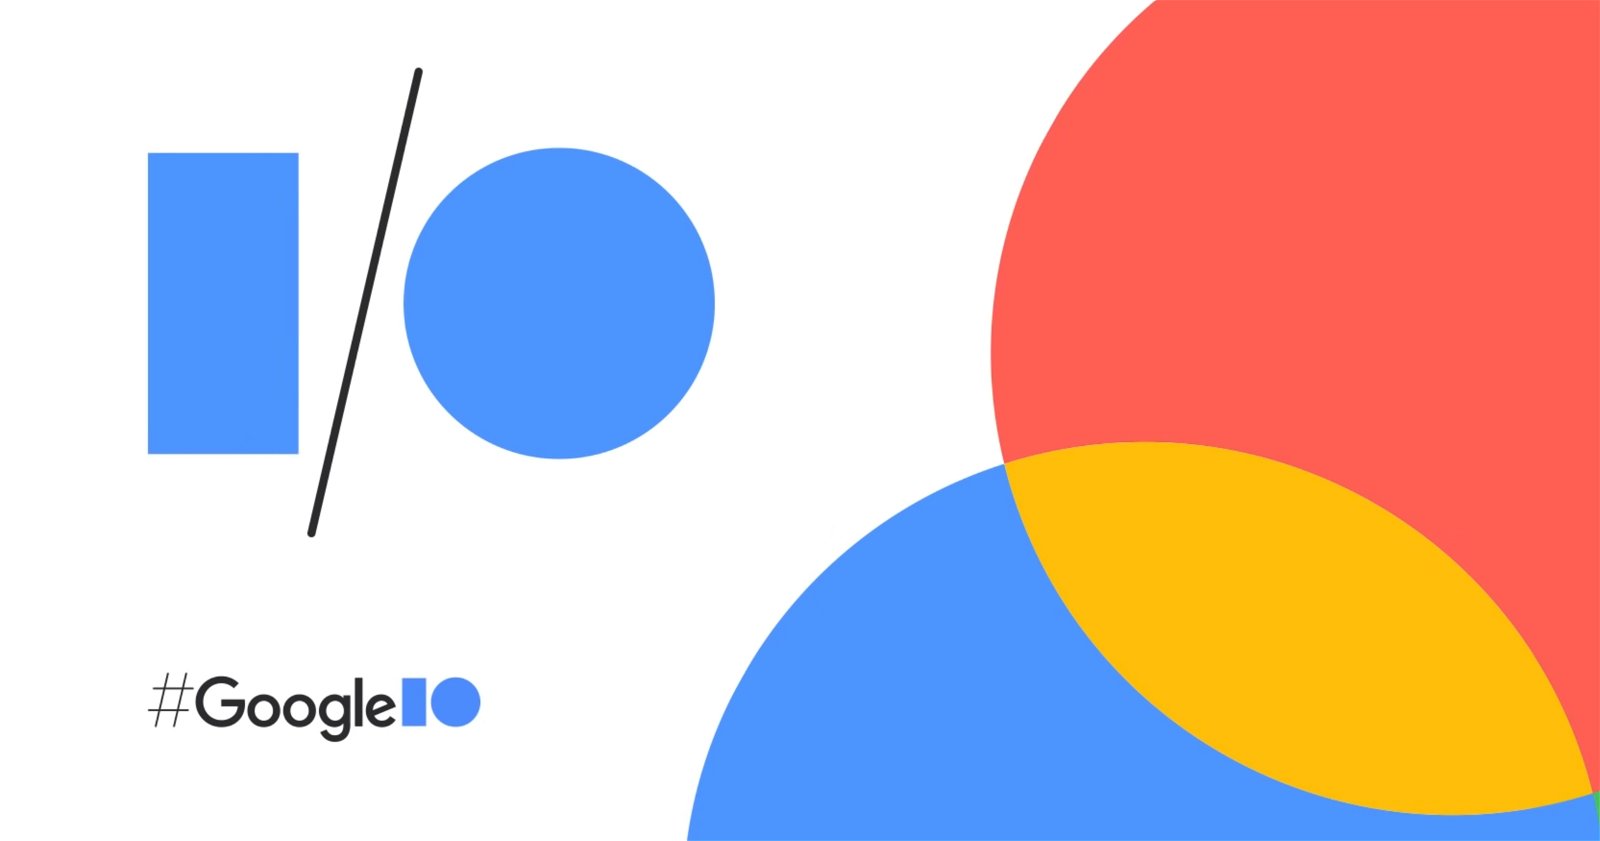 Google I/O 2022: how to follow the event live and what to expect